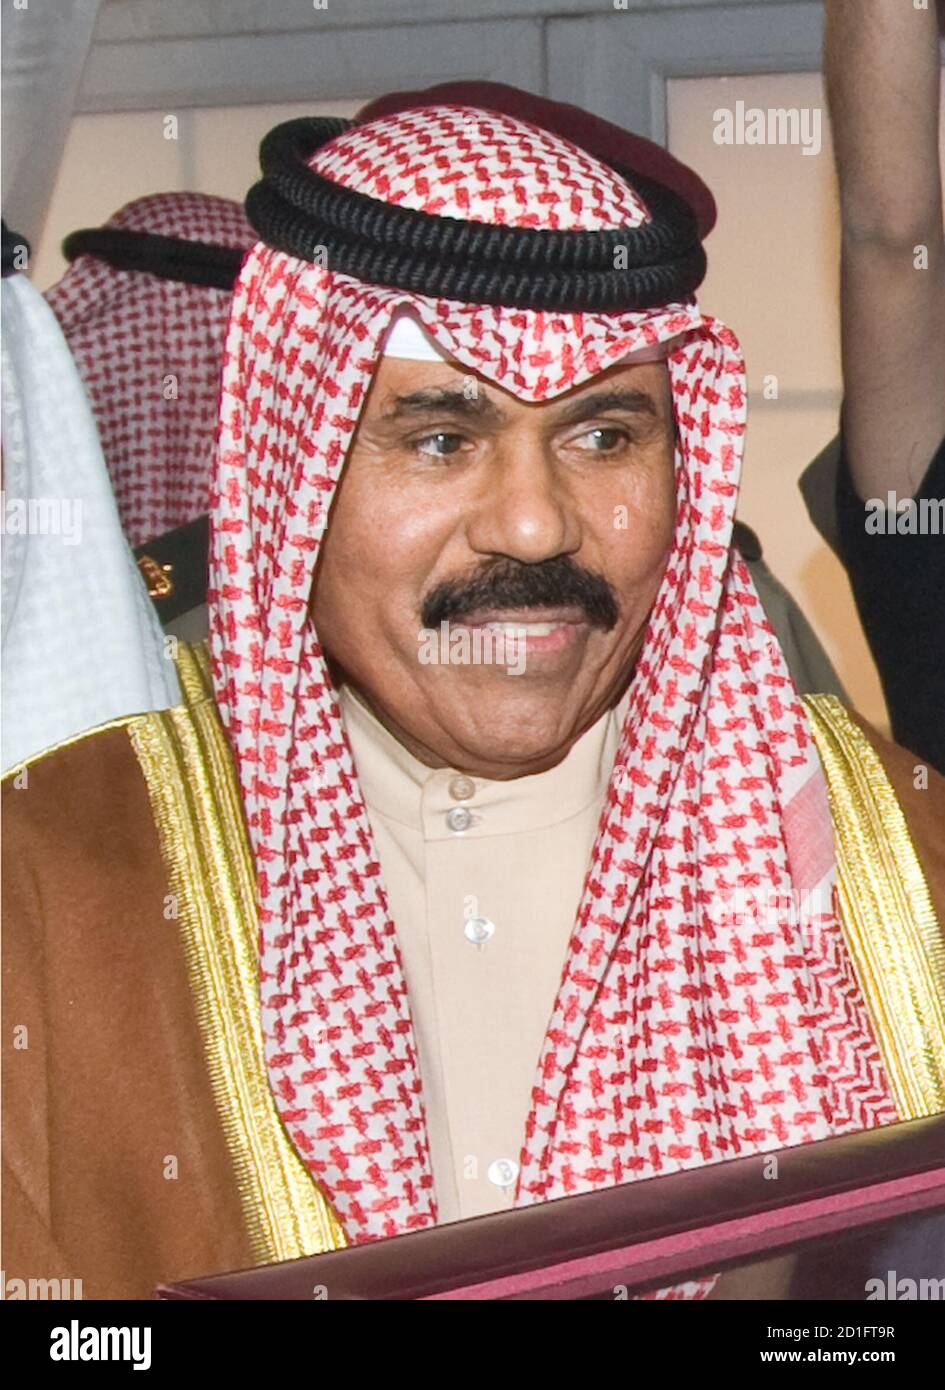 kuwaits-crown-prince-sheikh-nawaf-al-ahmed-al-sabah-is-pictured-during-the-official-launch-of-wataniya-airways-at-the-kuwaiti-airport-in-march-10-2009-file-photo-the-ruler-of-kuwait-will-dissolve-parliament-and-may-appoint-the-crown-prince-as-prime-minister-after-an-election-in-may-to-end-a-long-political-crisis-hindering-economic-reforms-lawmakers-said-on-march-18-reutersstephanie-mcgeheefiles-kuwait-politics-headshot-royals-2D1FT9R.jpg